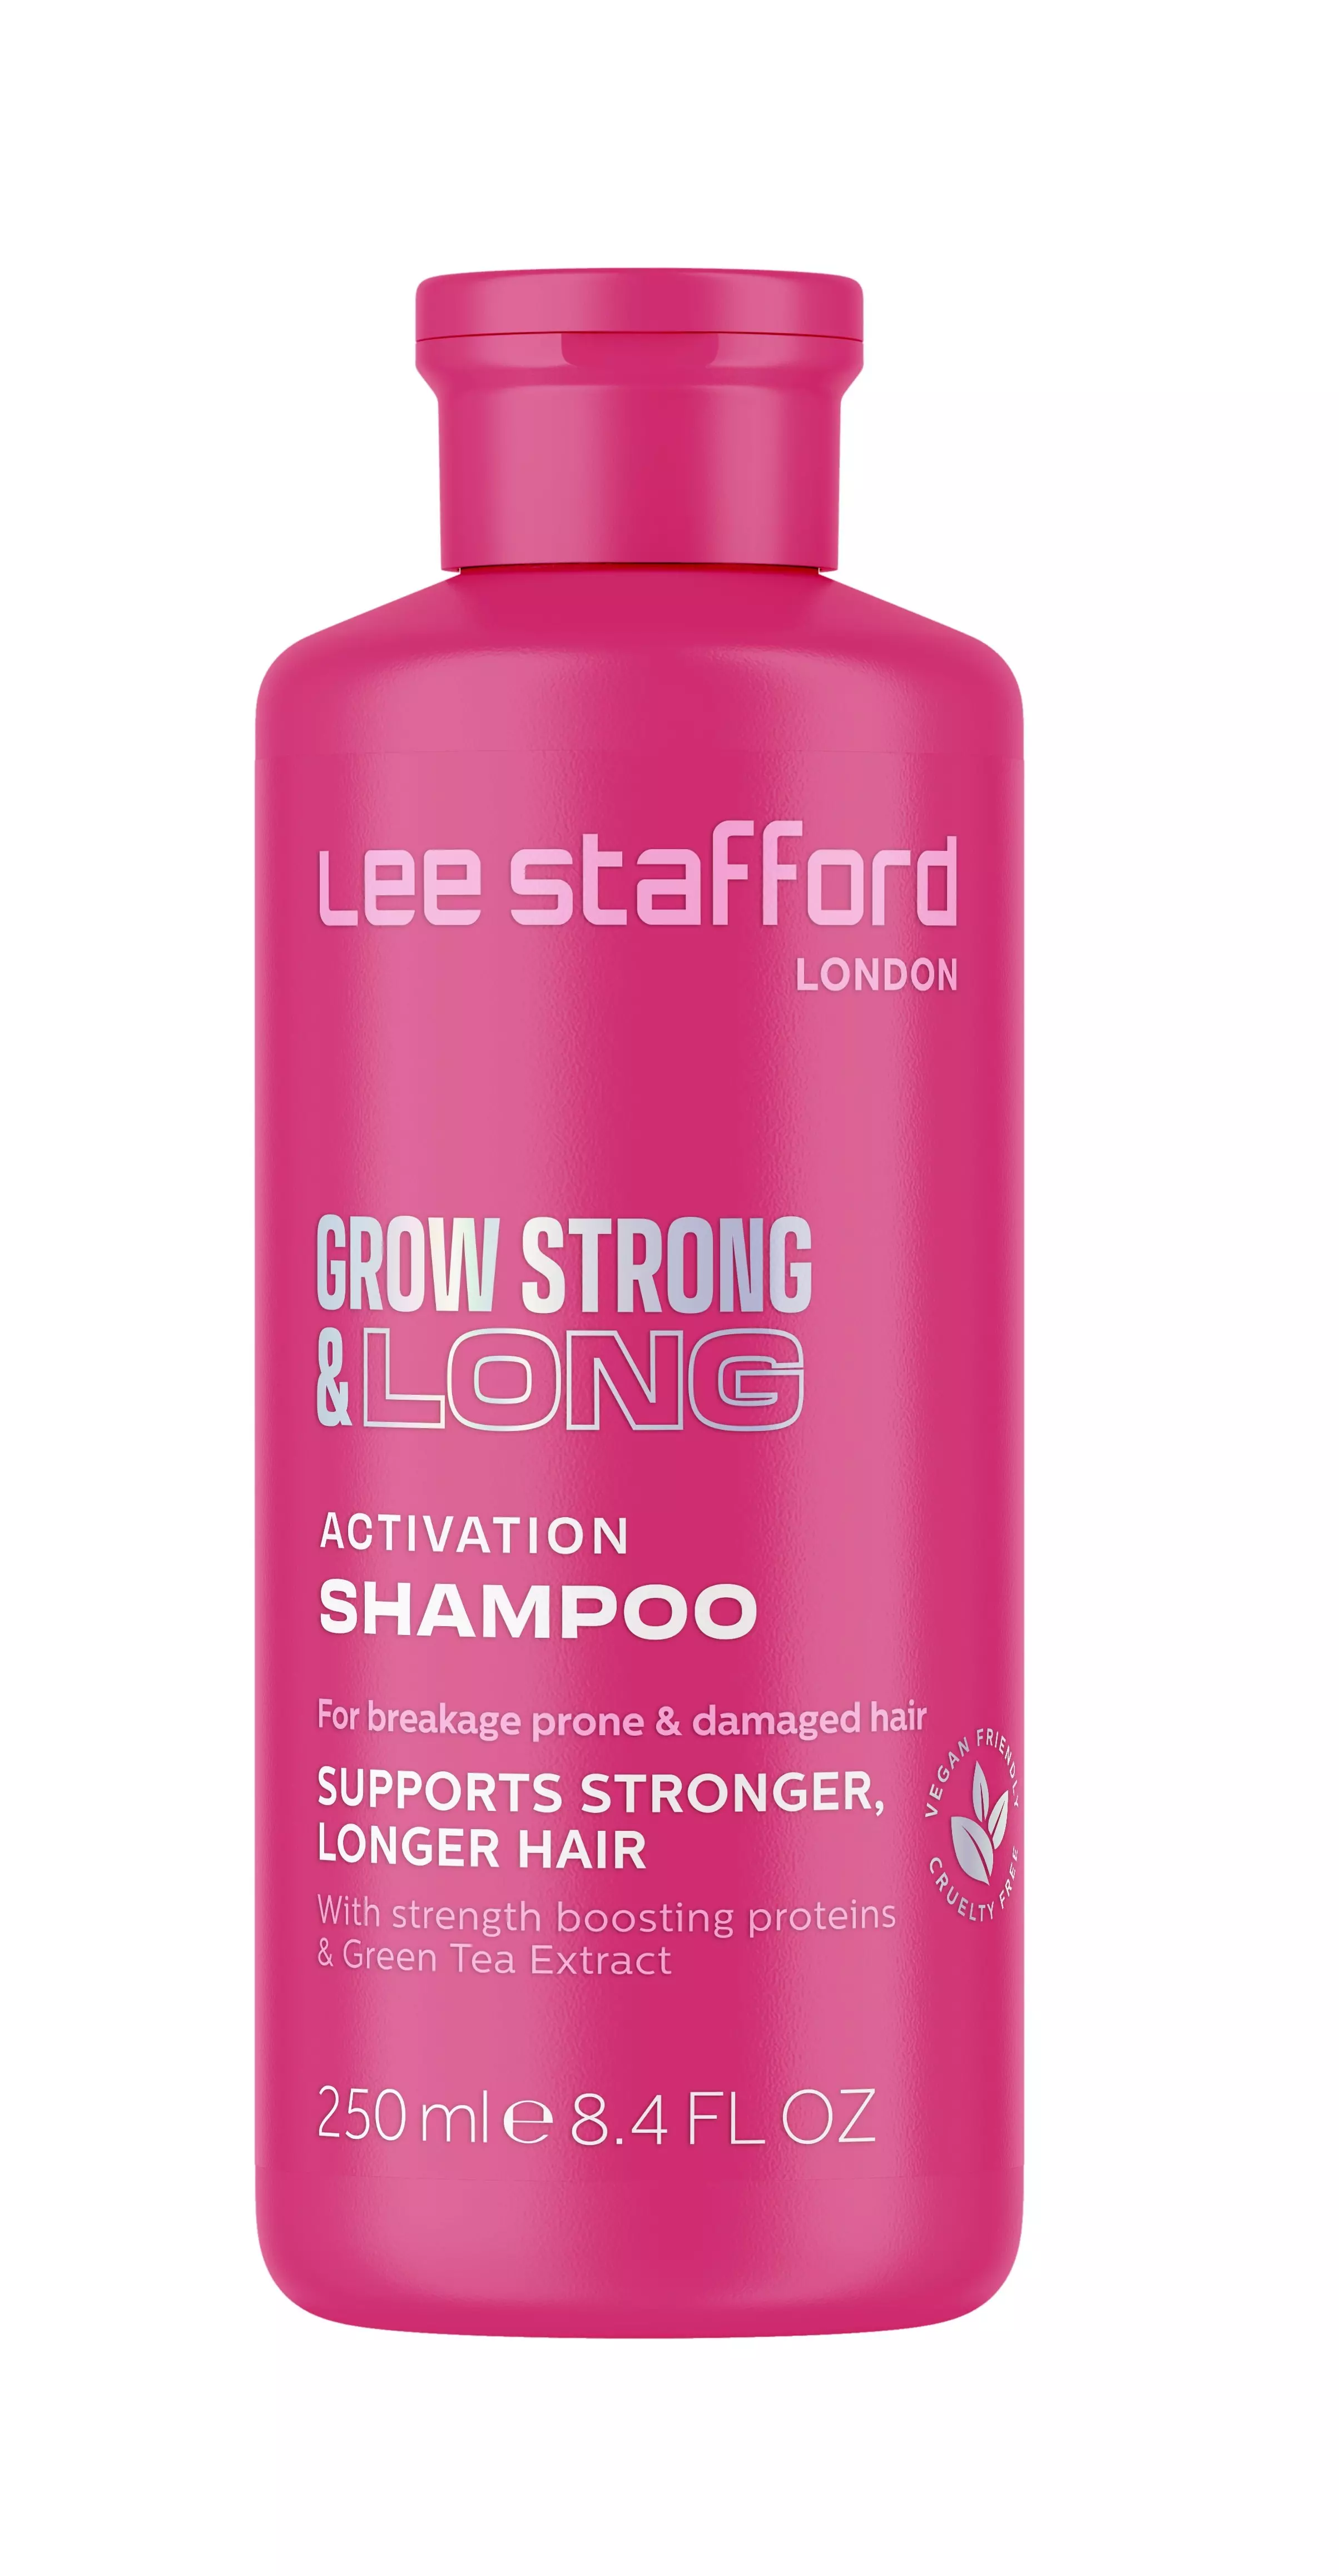 Lee Stafford Grow Stronglong Activation Shampoo